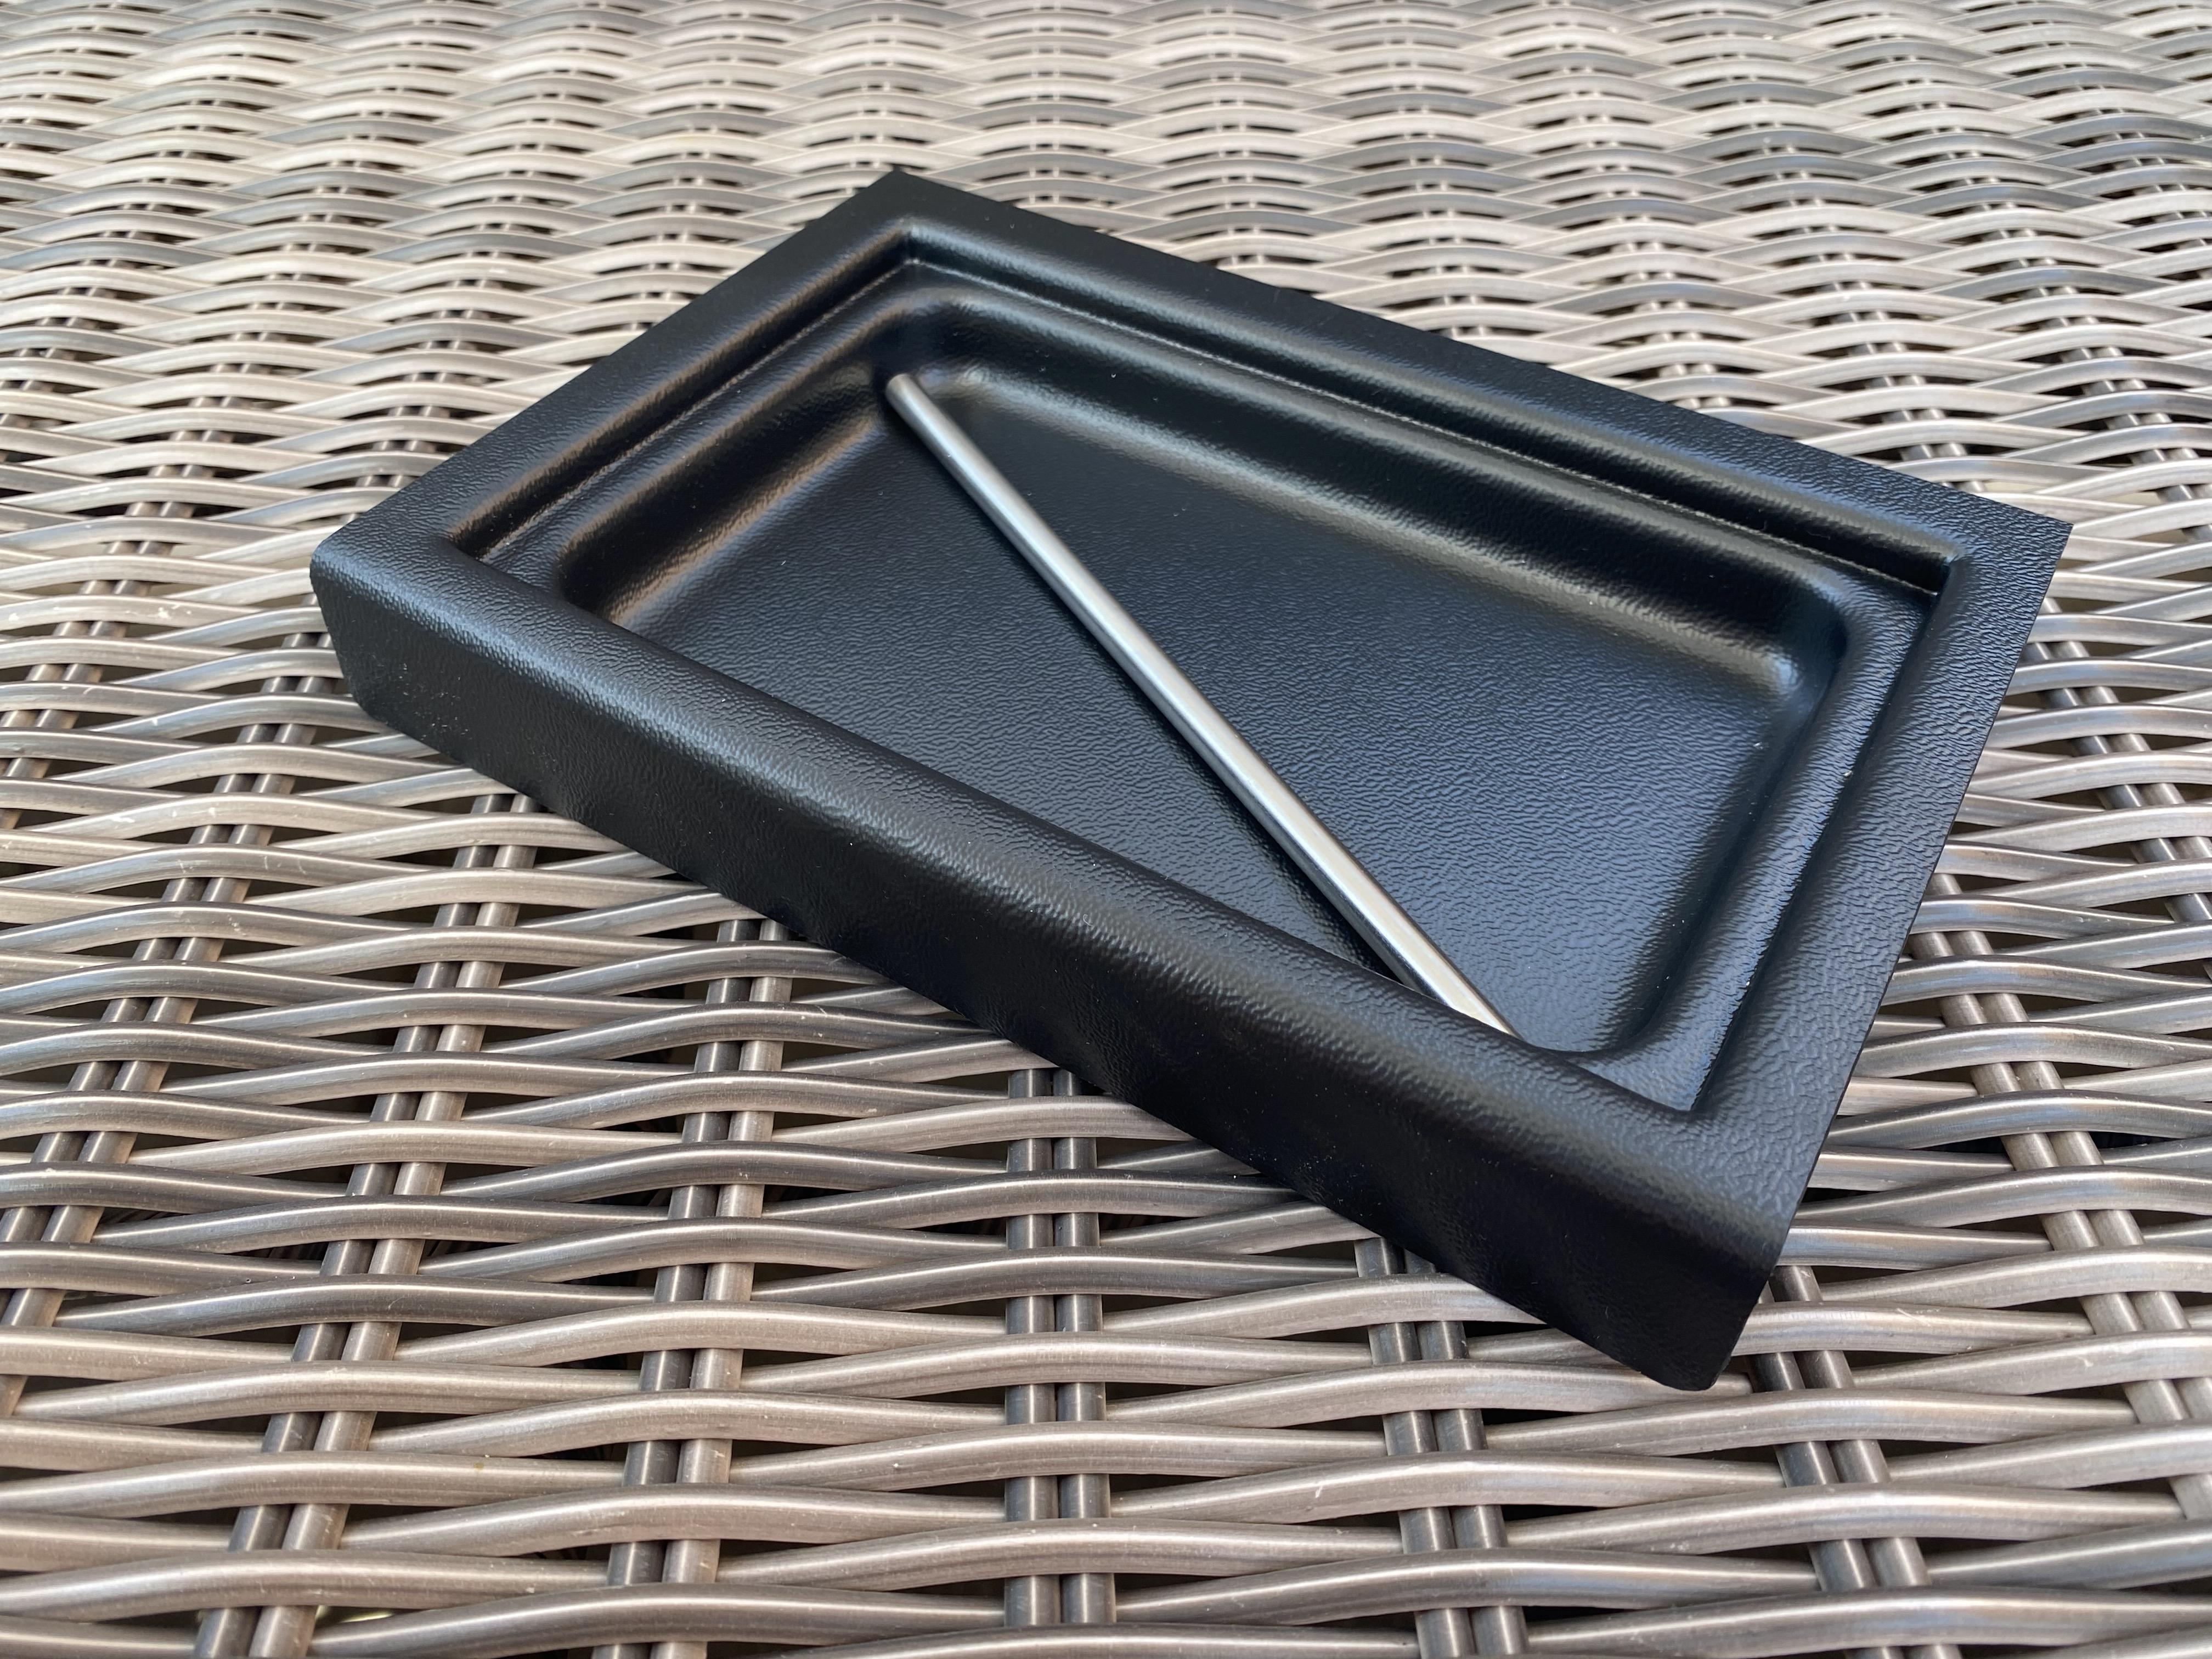 Slim drip tray and vent tube